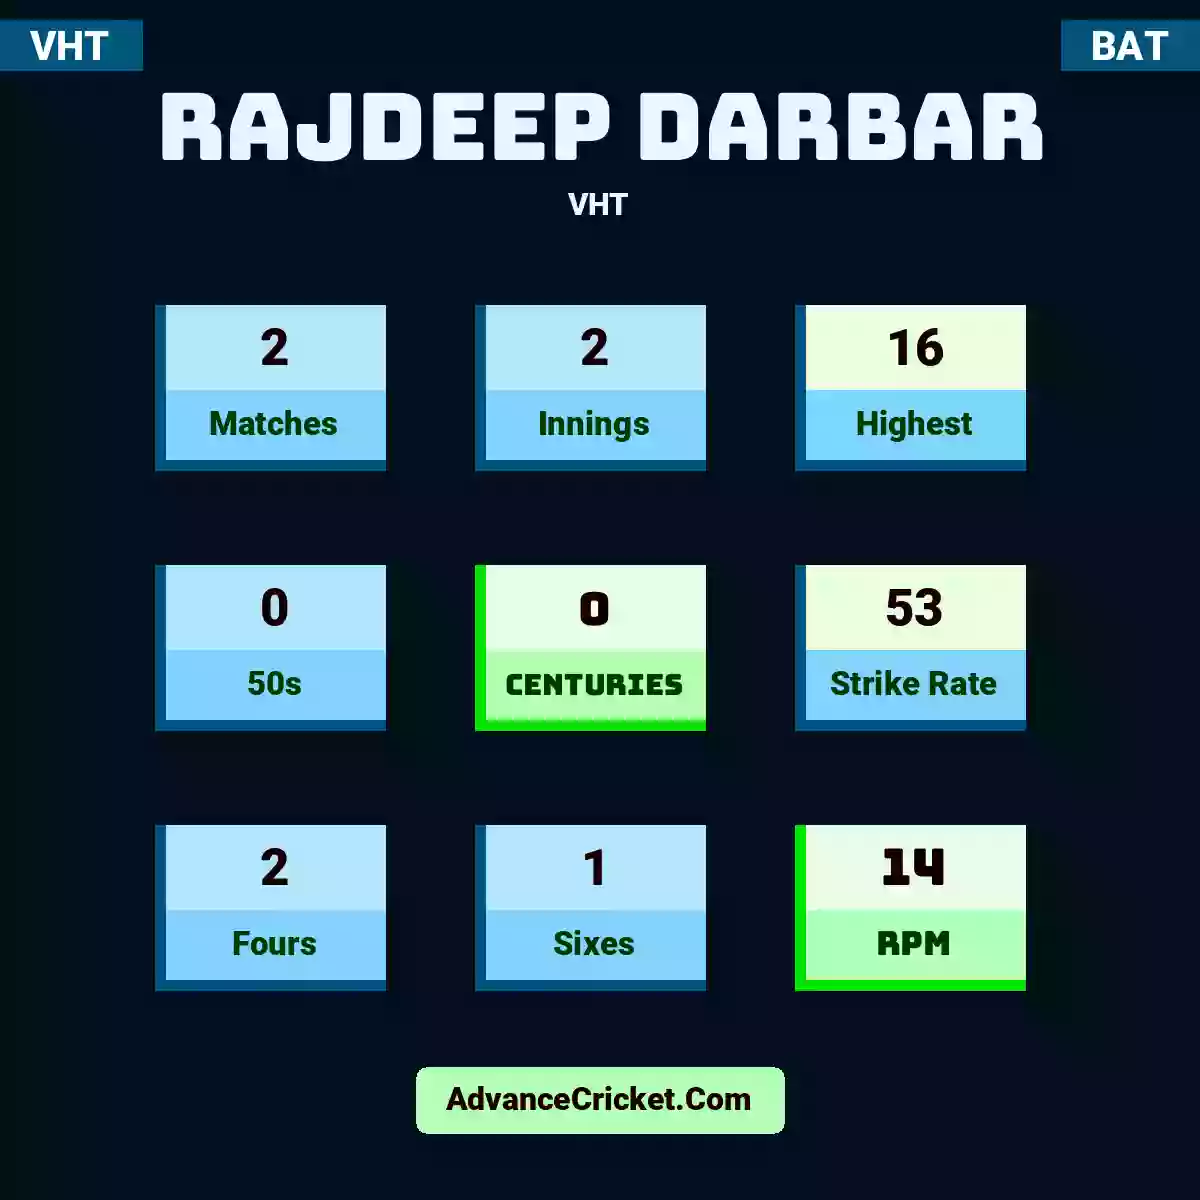 Rajdeep Darbar VHT , Rajdeep Darbar played 2 matches, scored 16 runs as highest, 0 half-centuries, and 0 centuries, with a strike rate of 53. R.Darbar hit 2 fours and 1 sixes, with an RPM of 14.